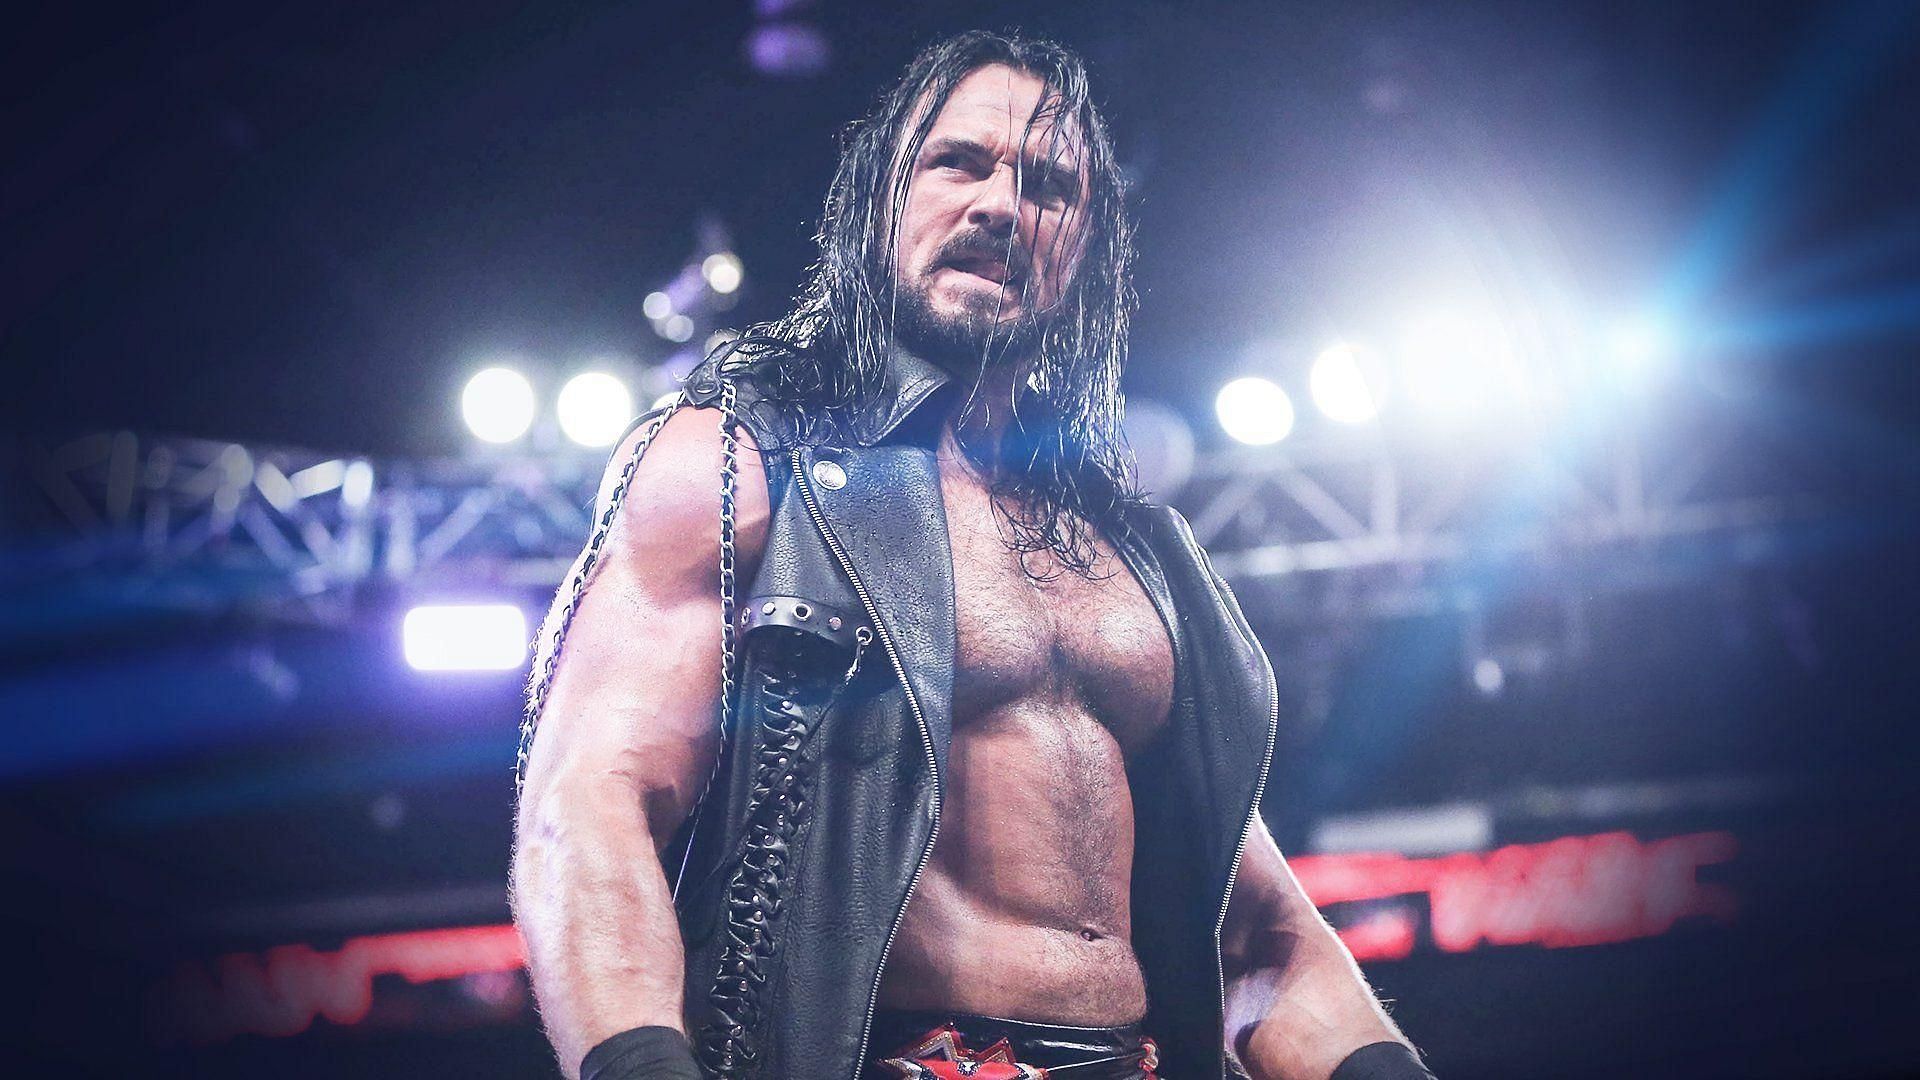 Drew McIntyre builds his own momentum.